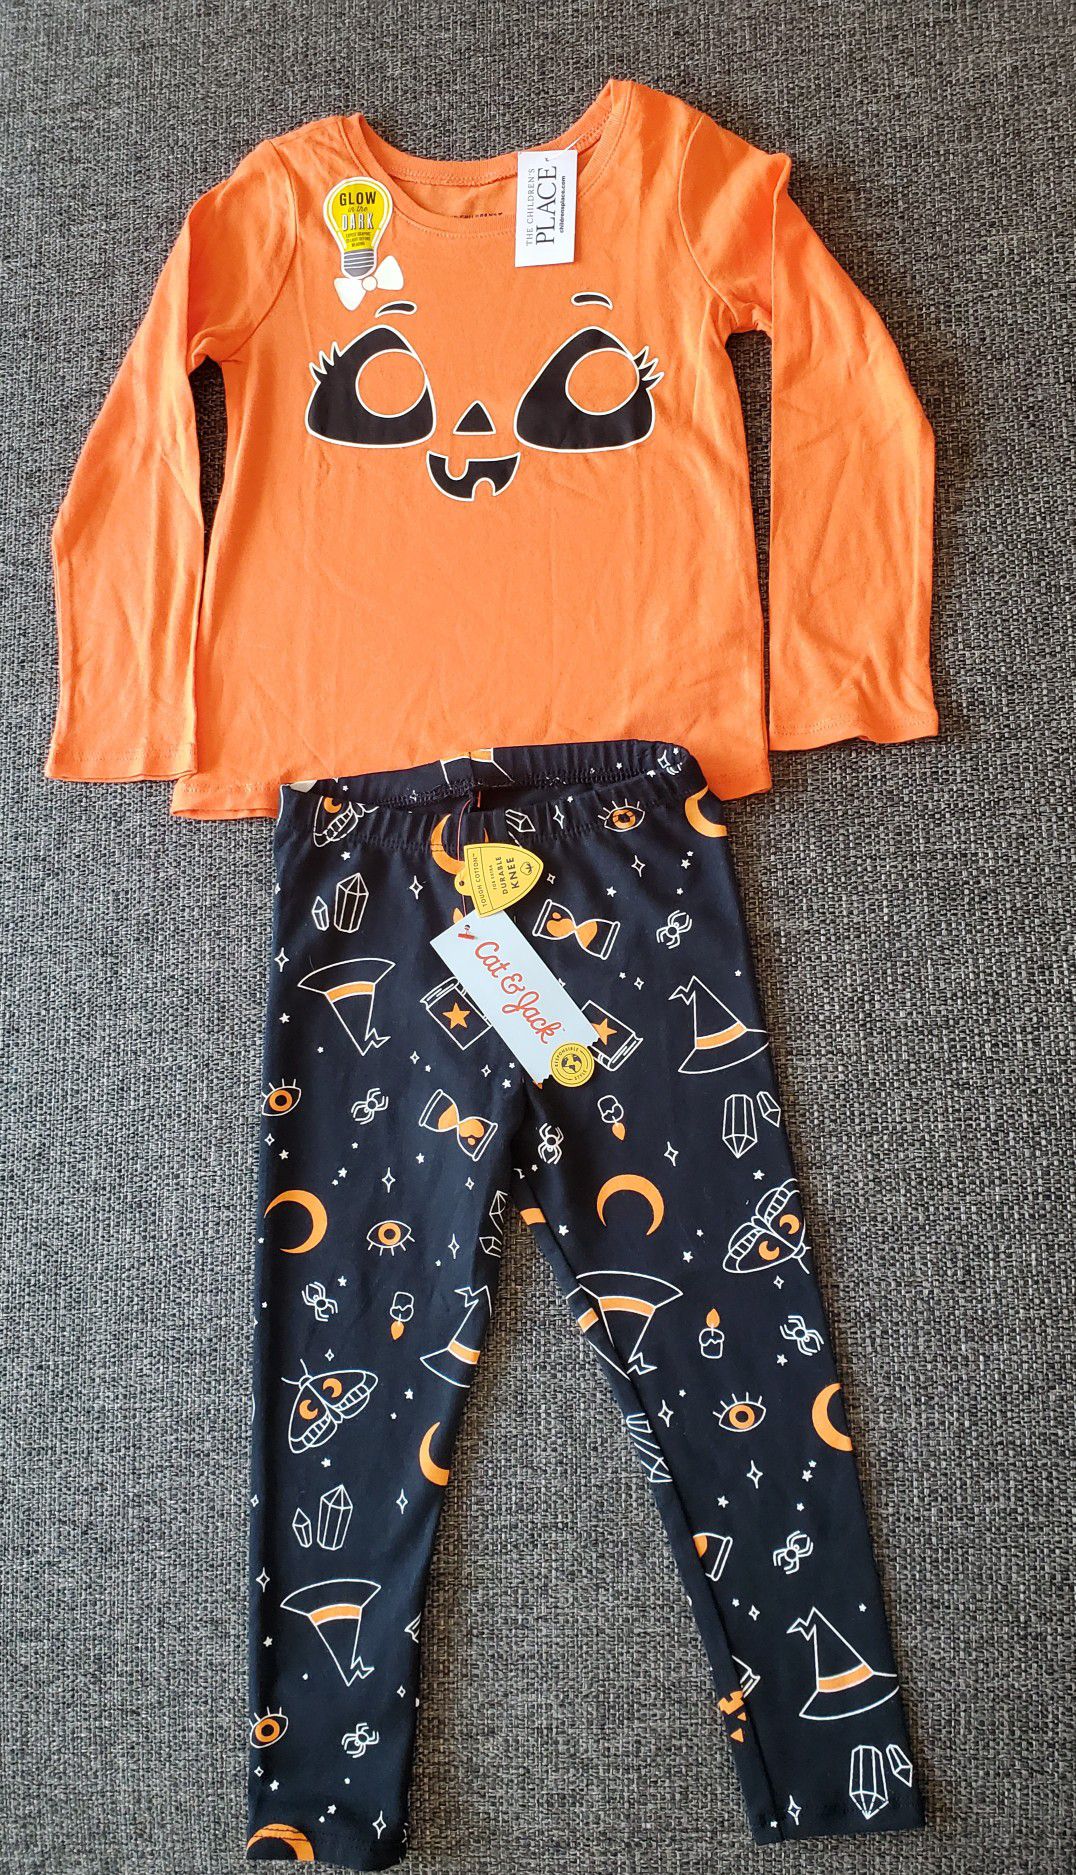 NEW 3t girls Halloween outfit. $8